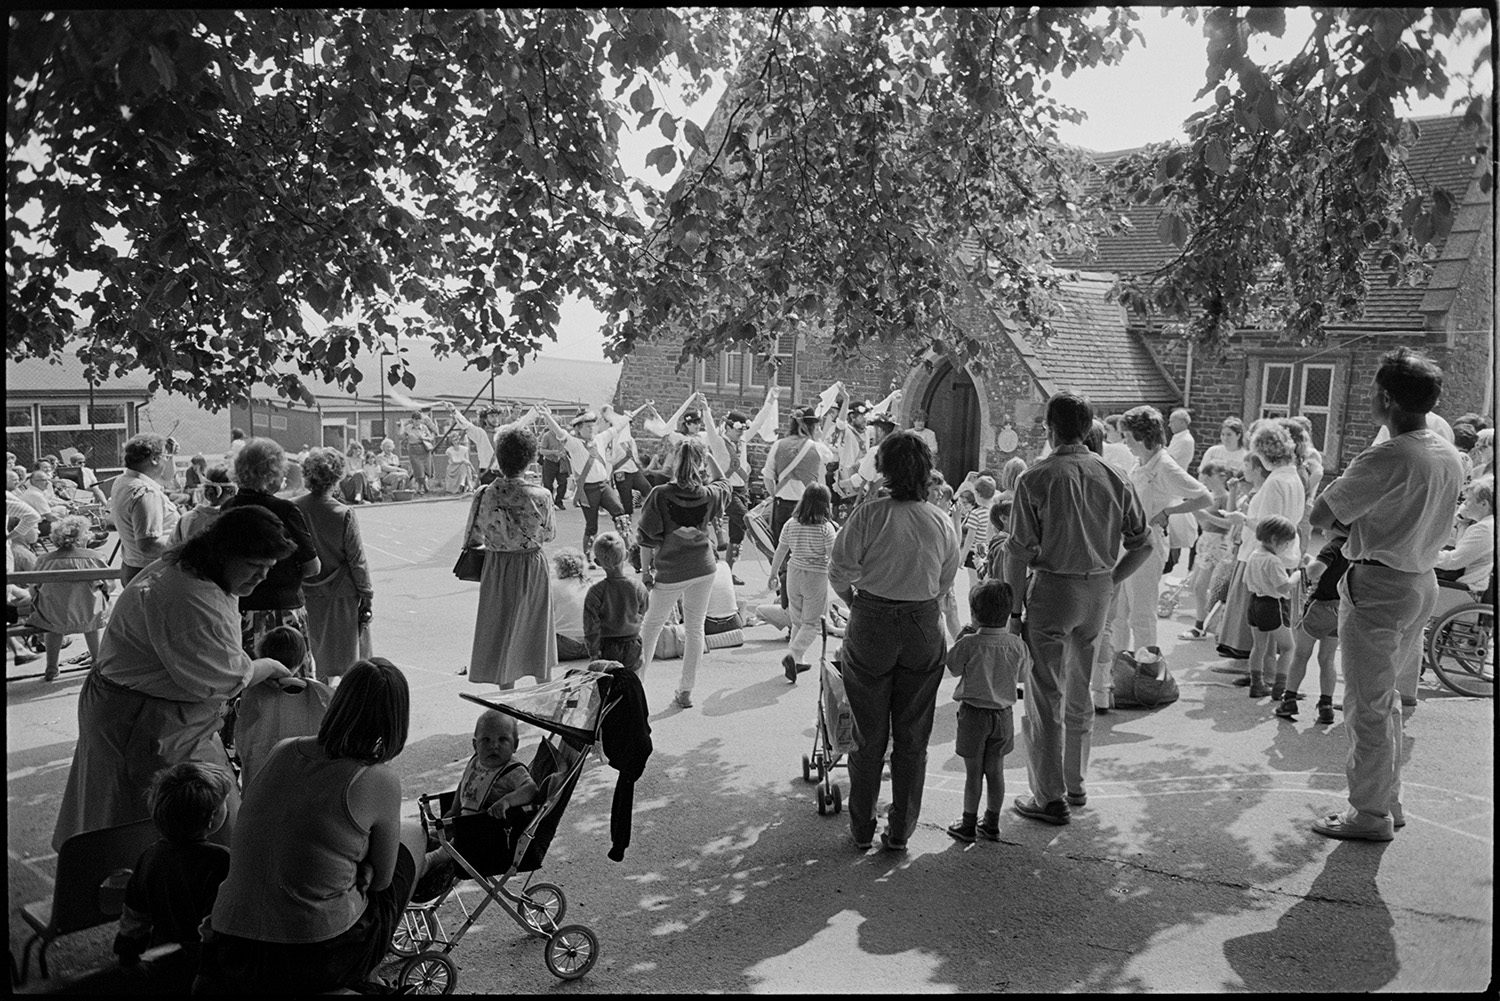 School fete, Morris dancers, stalls, former teacher chatting, bouncy castle, crowds.
[People gathered in the playground at Chulmleigh Primary School to watch Morris dancers at the school fete. Mothers and children are in the shade of a tree in the foreground.]